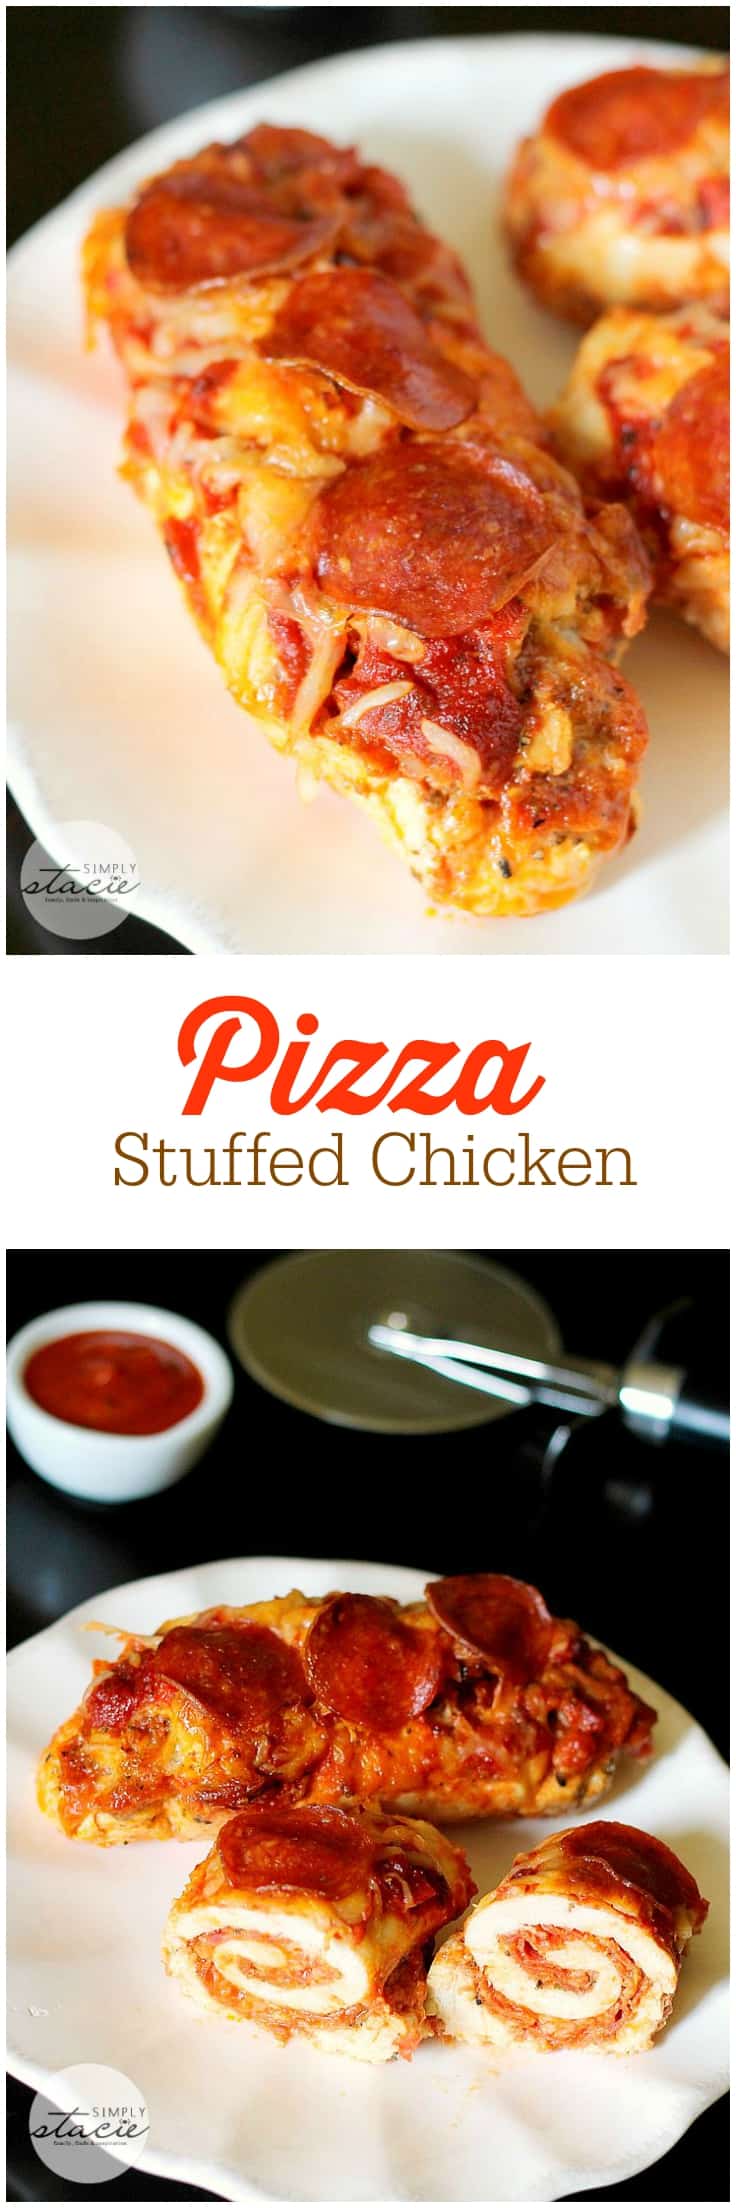 Pizza Stuffed Chicken - Ditch the carbs, but still satisfy that pizza craving! This keto dinner is super flavorful with juicy chicken breasts, marinara, Italian seasoning, cheese and pepperoni.